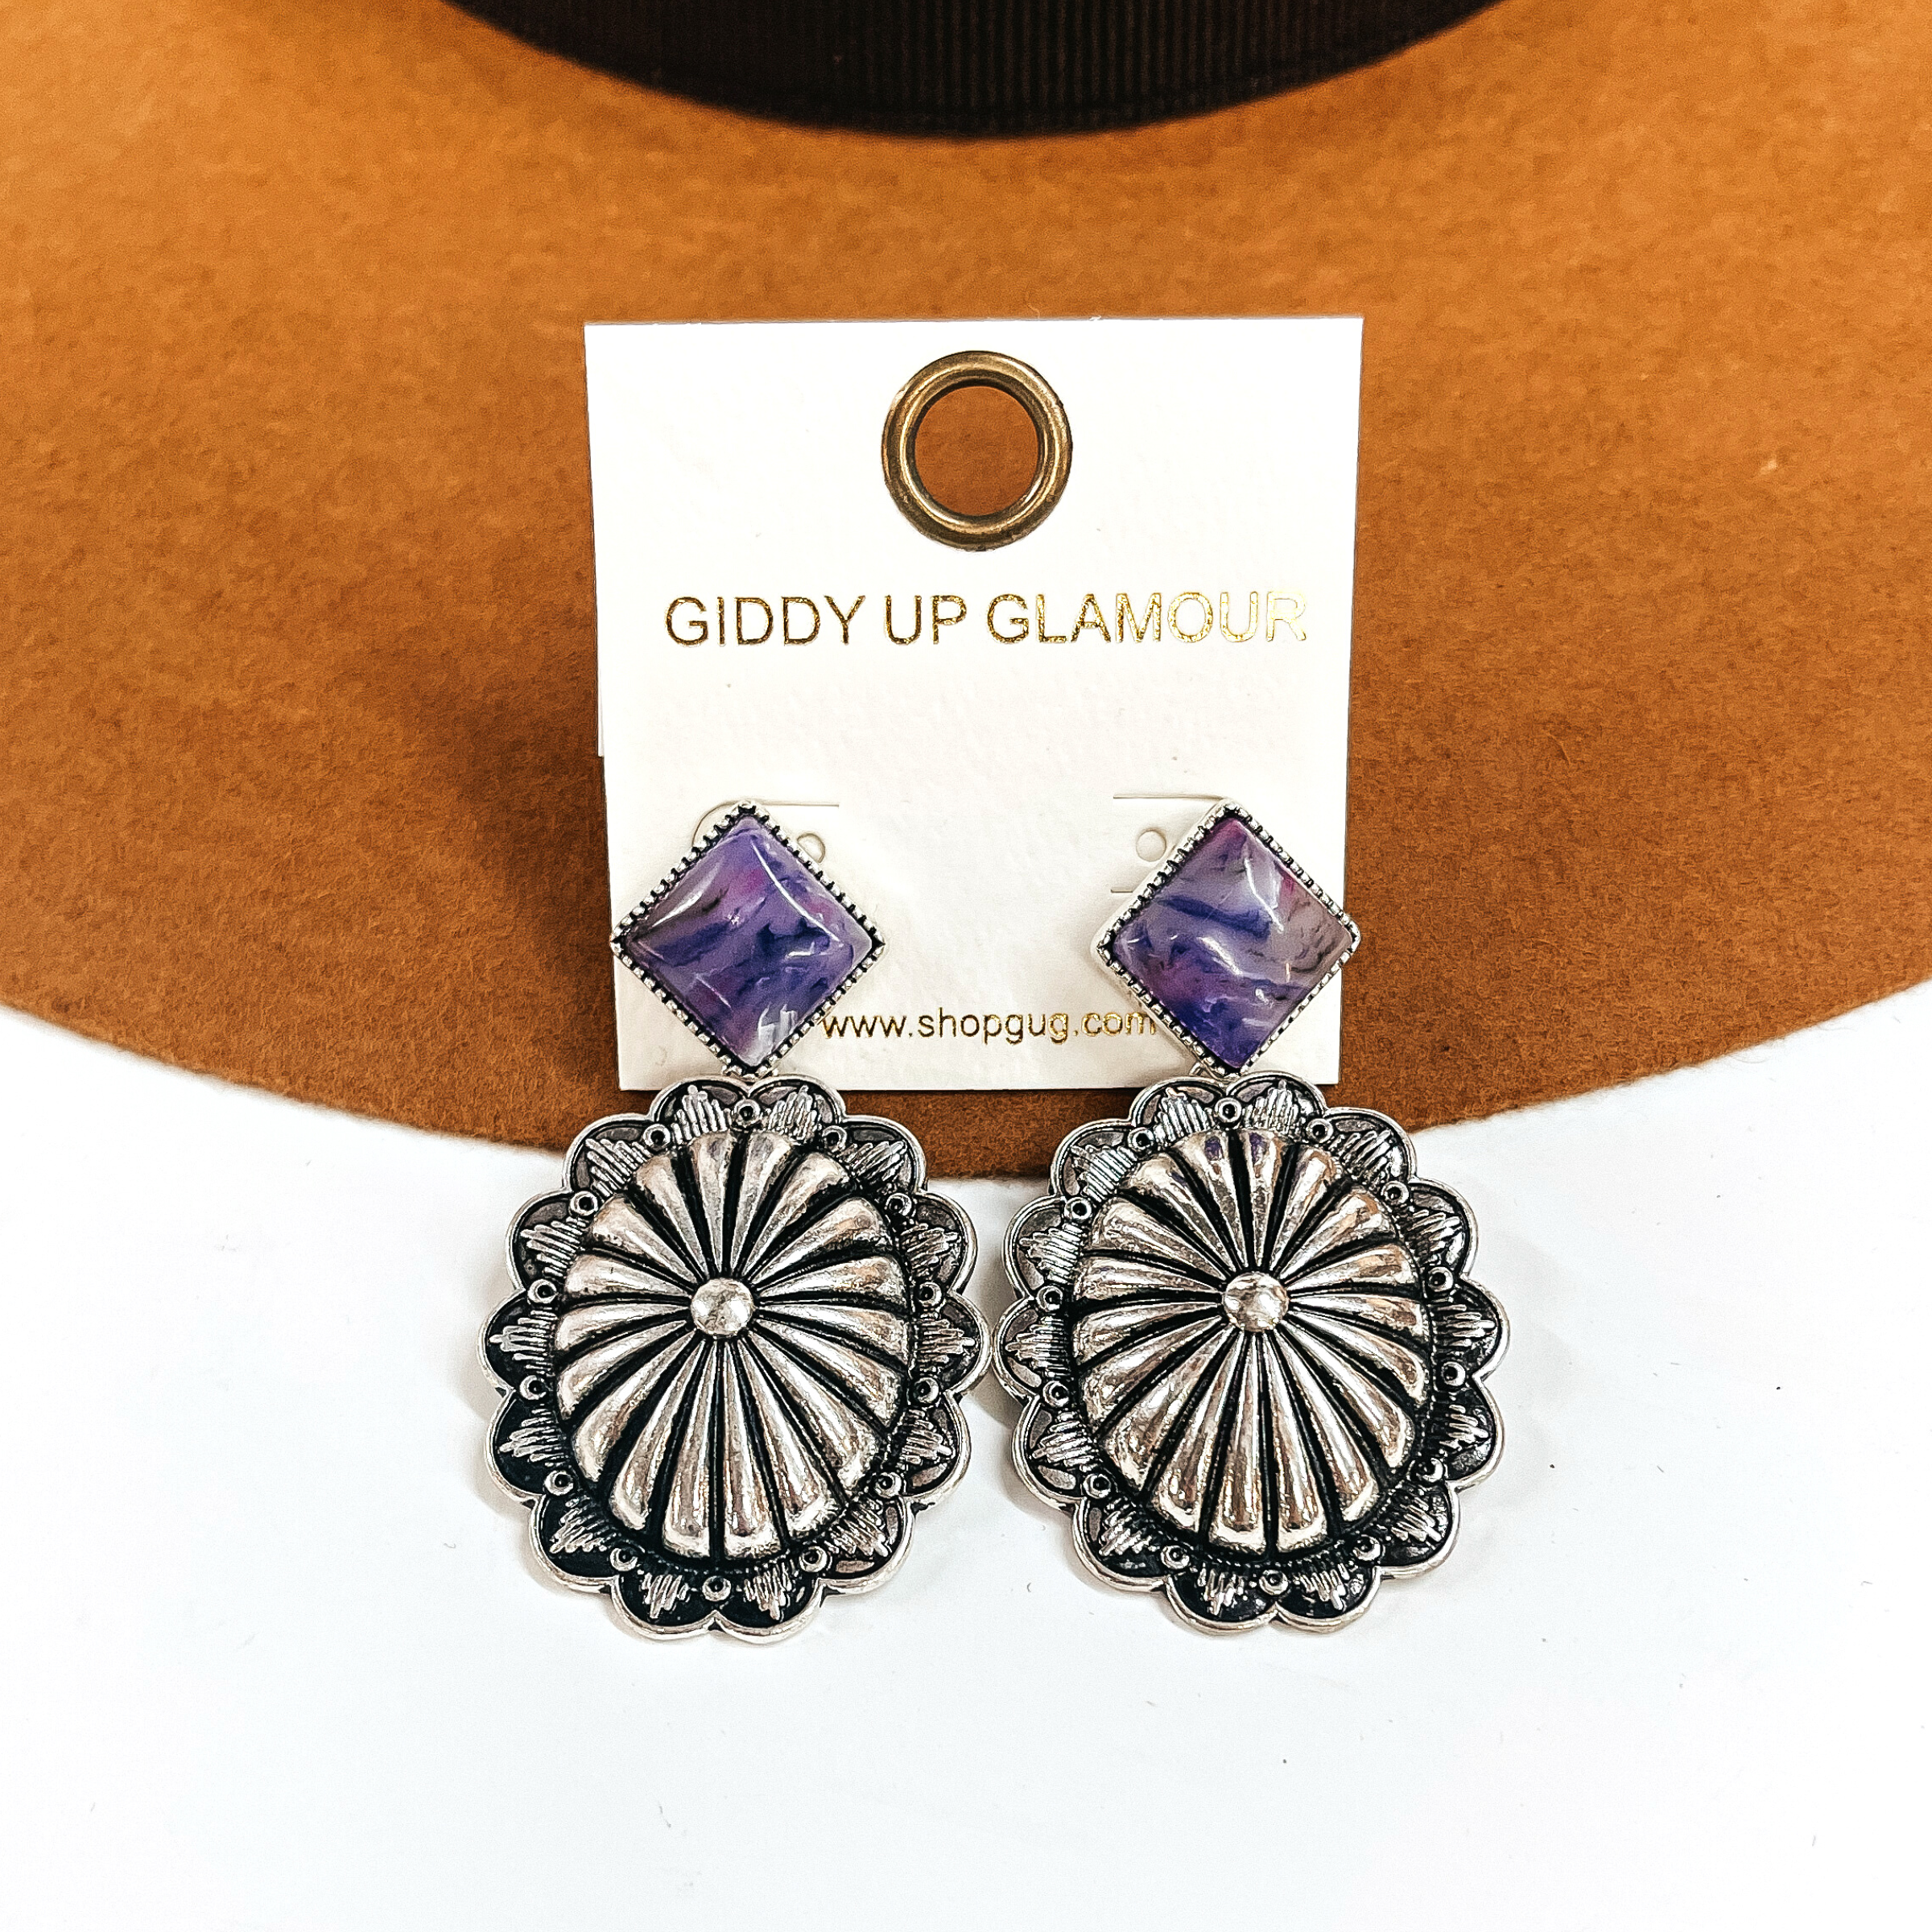 These are silver concho drop earrings with a purple-marble stone post in a silver  setting. These earrings are taken laying on a camel felt hat and on a white background.